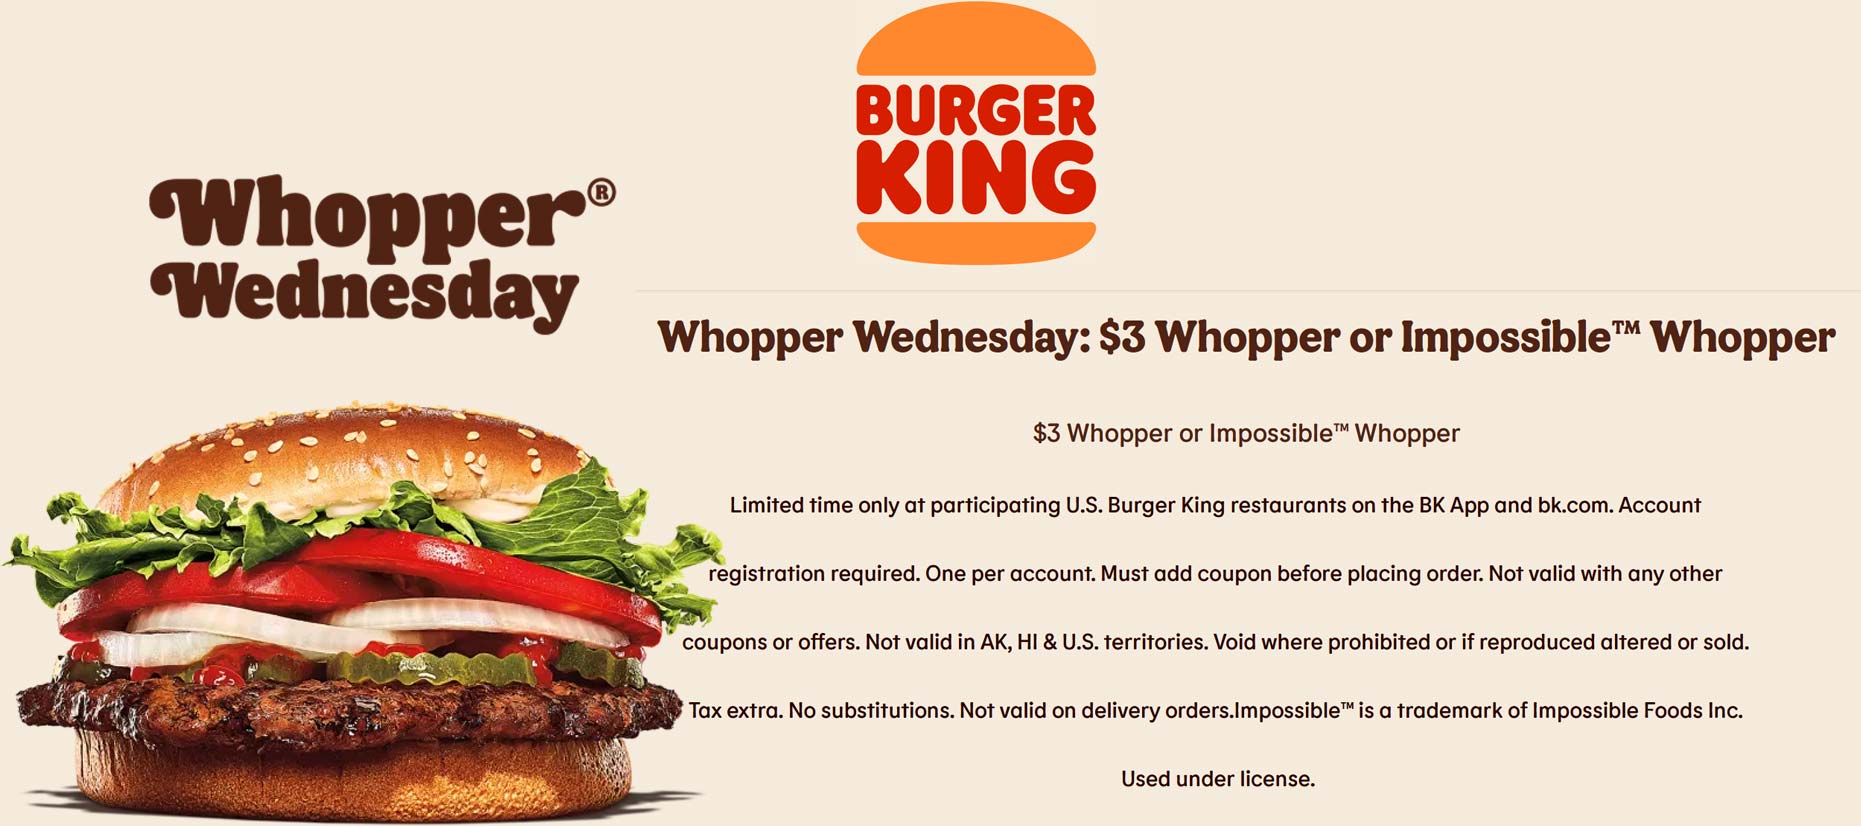 Burger King restaurants Coupon  $3 whopper today at Burger King restaurants #burgerking 